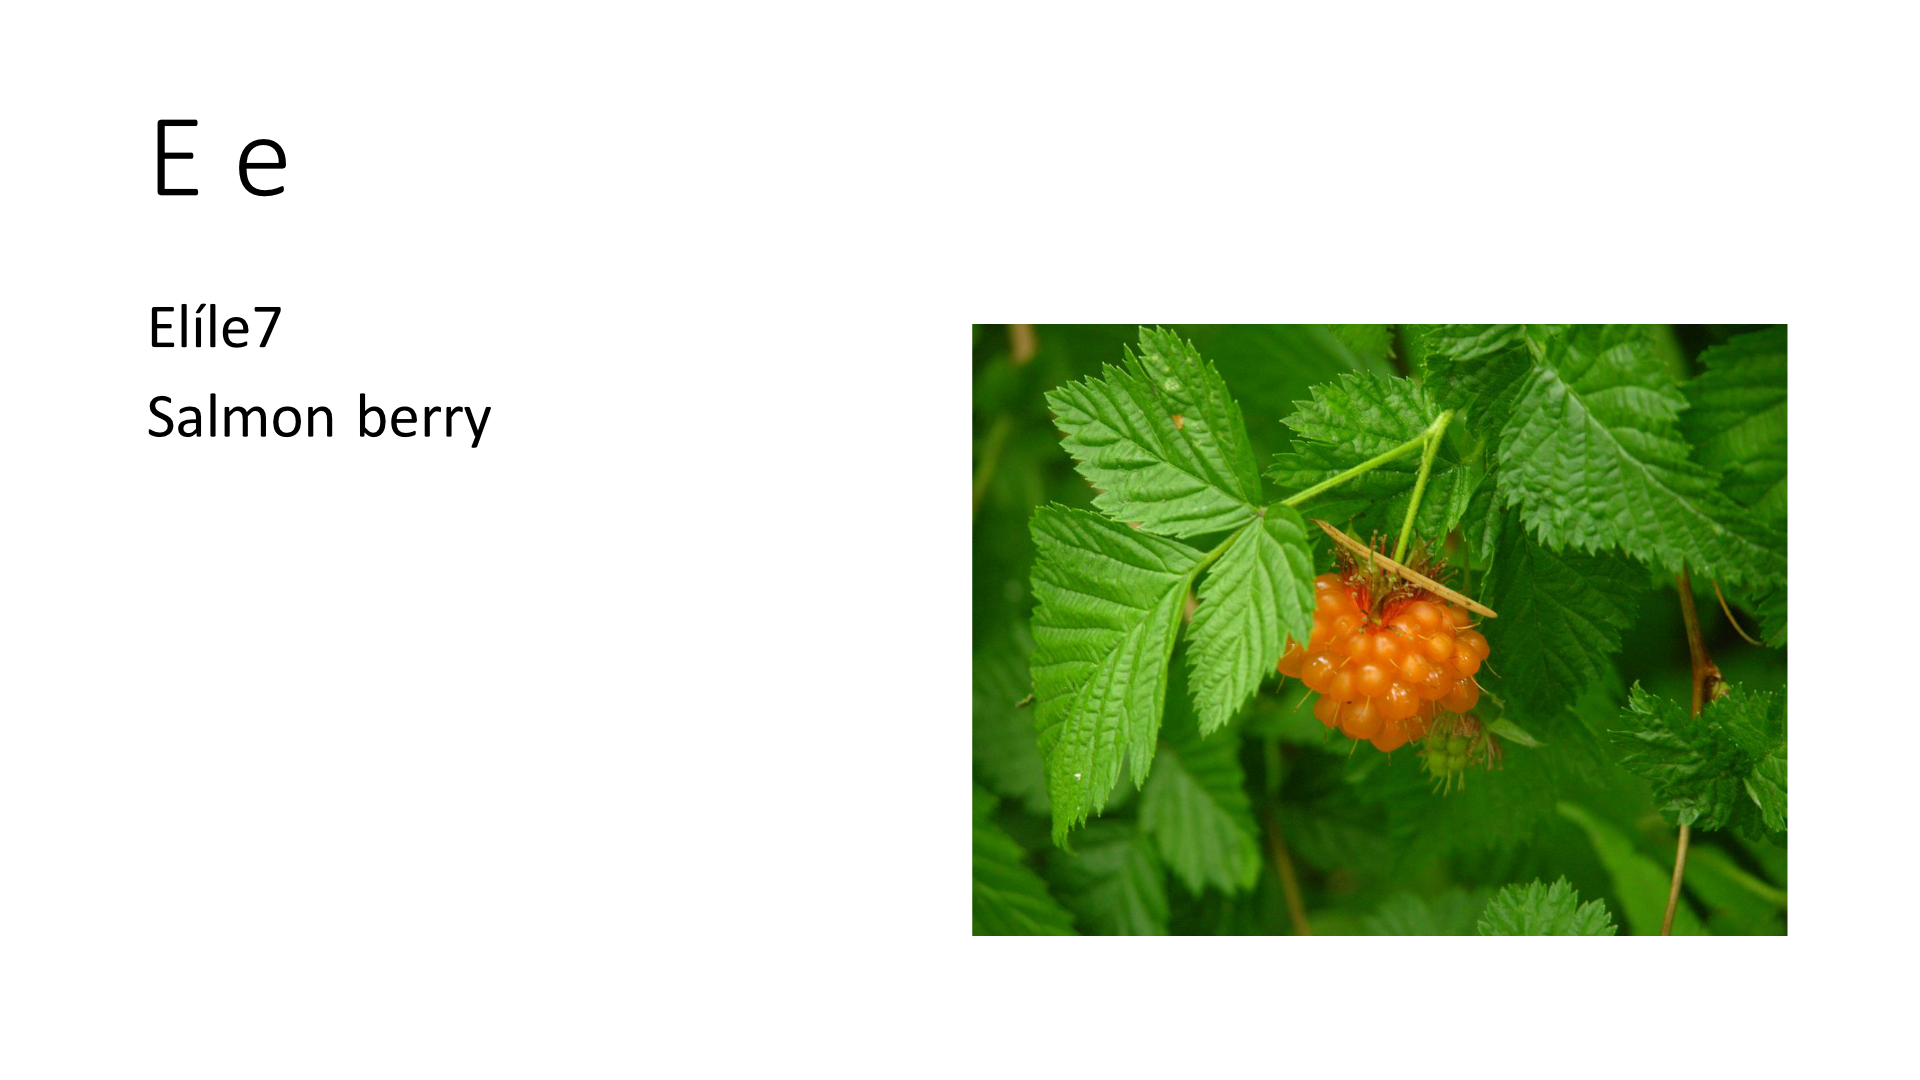 A picture of a salmon berry